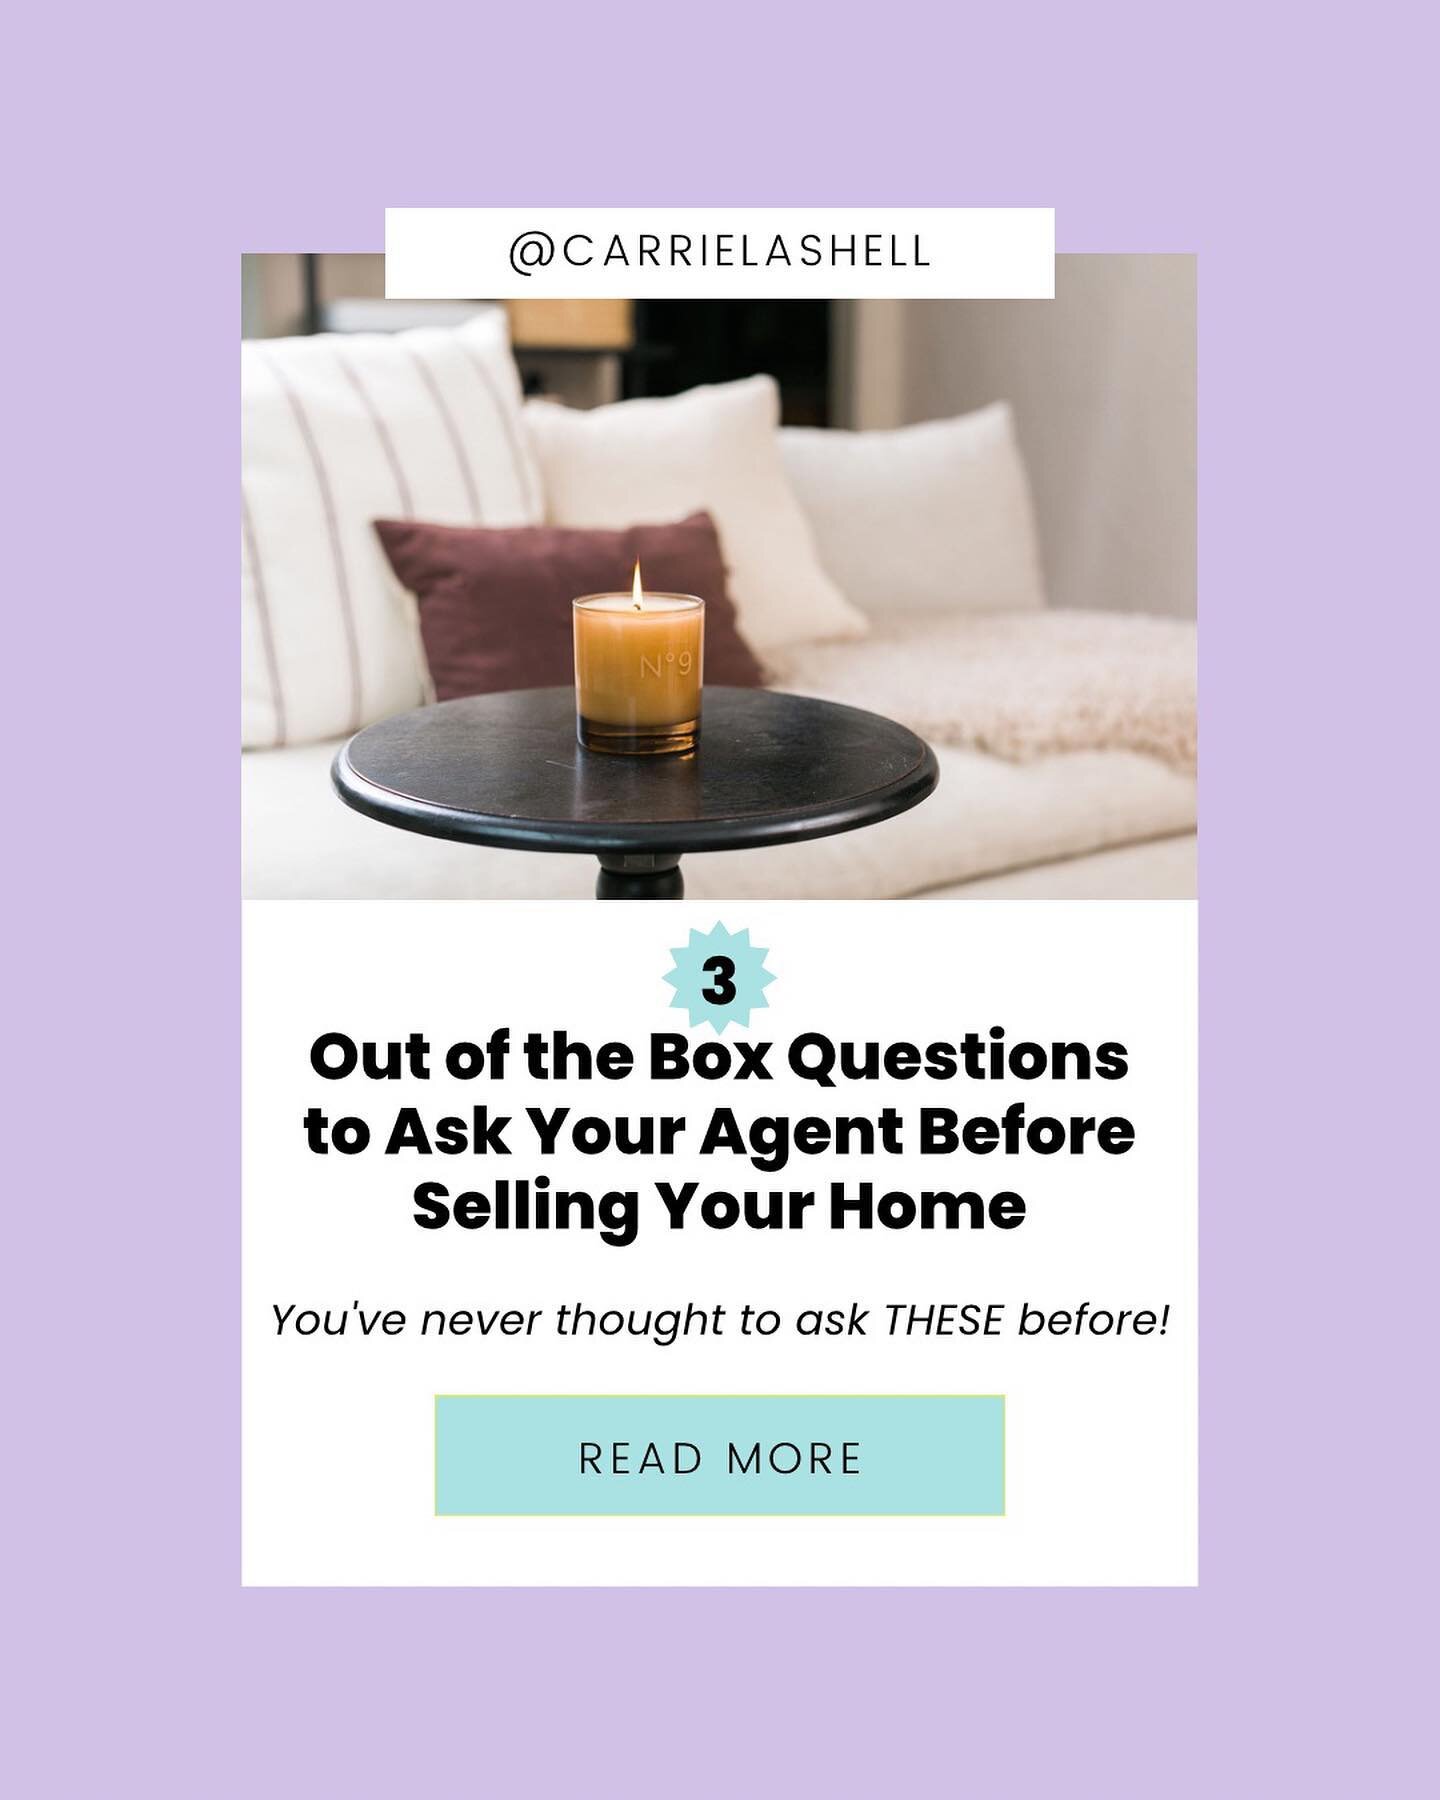 Real estate agents don&rsquo;t want you to ask these three questions!

One of the most important steps in selling your home is finding the right agent to work with. If you've been following me for a while, you already know the reasons to avoid the Fo